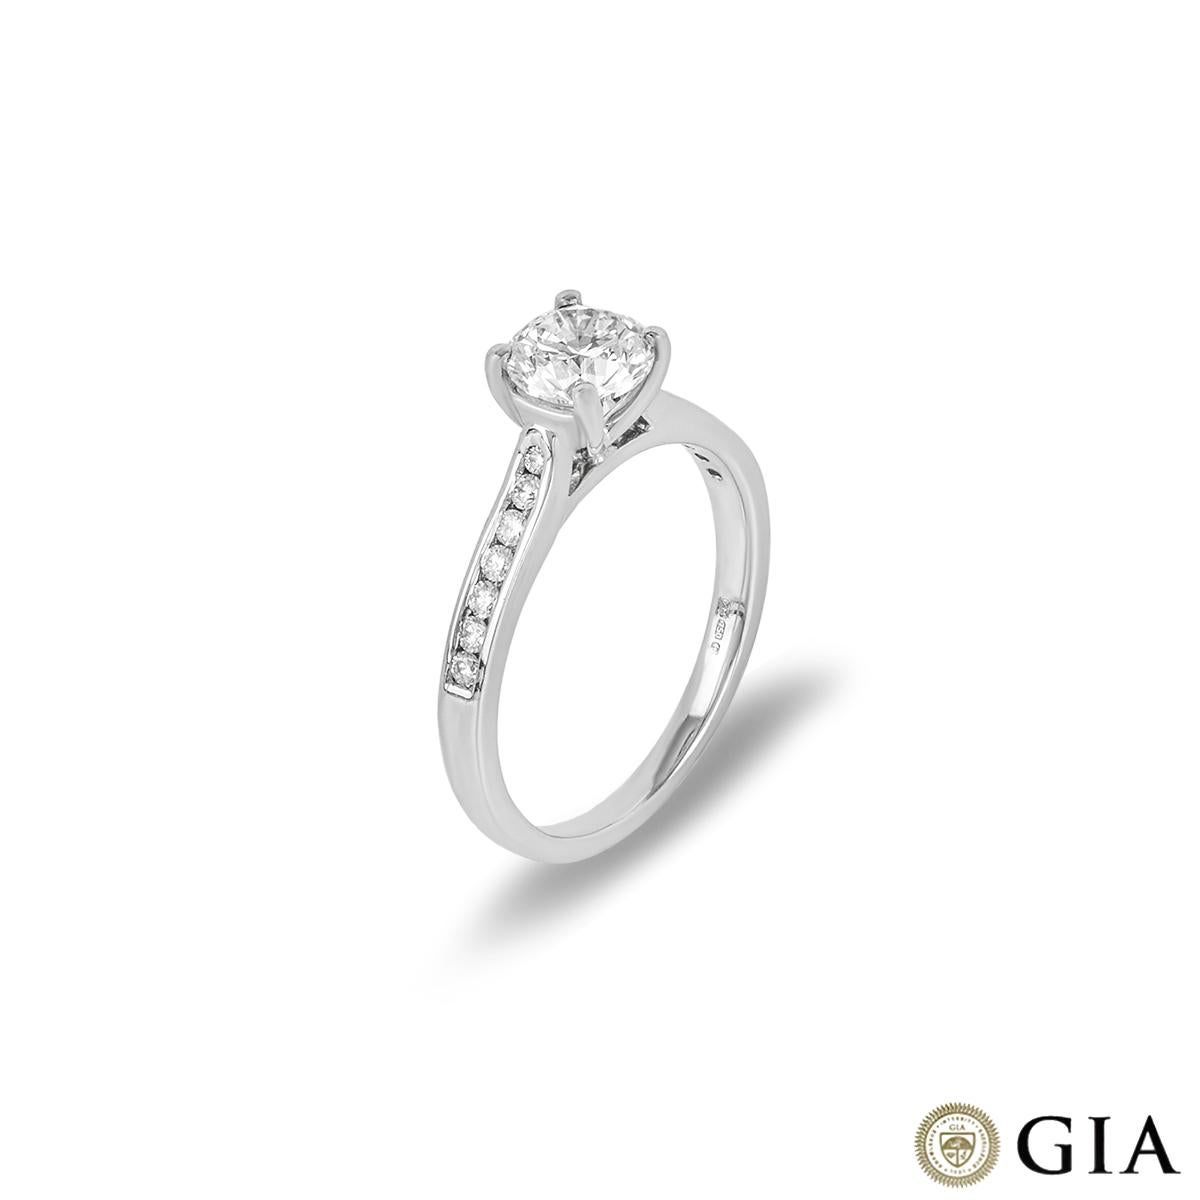 A beautiful 18k white gold diamond engagement ring. The central round brilliant cut diamond is set in a four claw mount, weighing 0.90ct, H colour and VS1 clarity. The ring is further complemented with 14 round brilliant cut diamonds channel set to